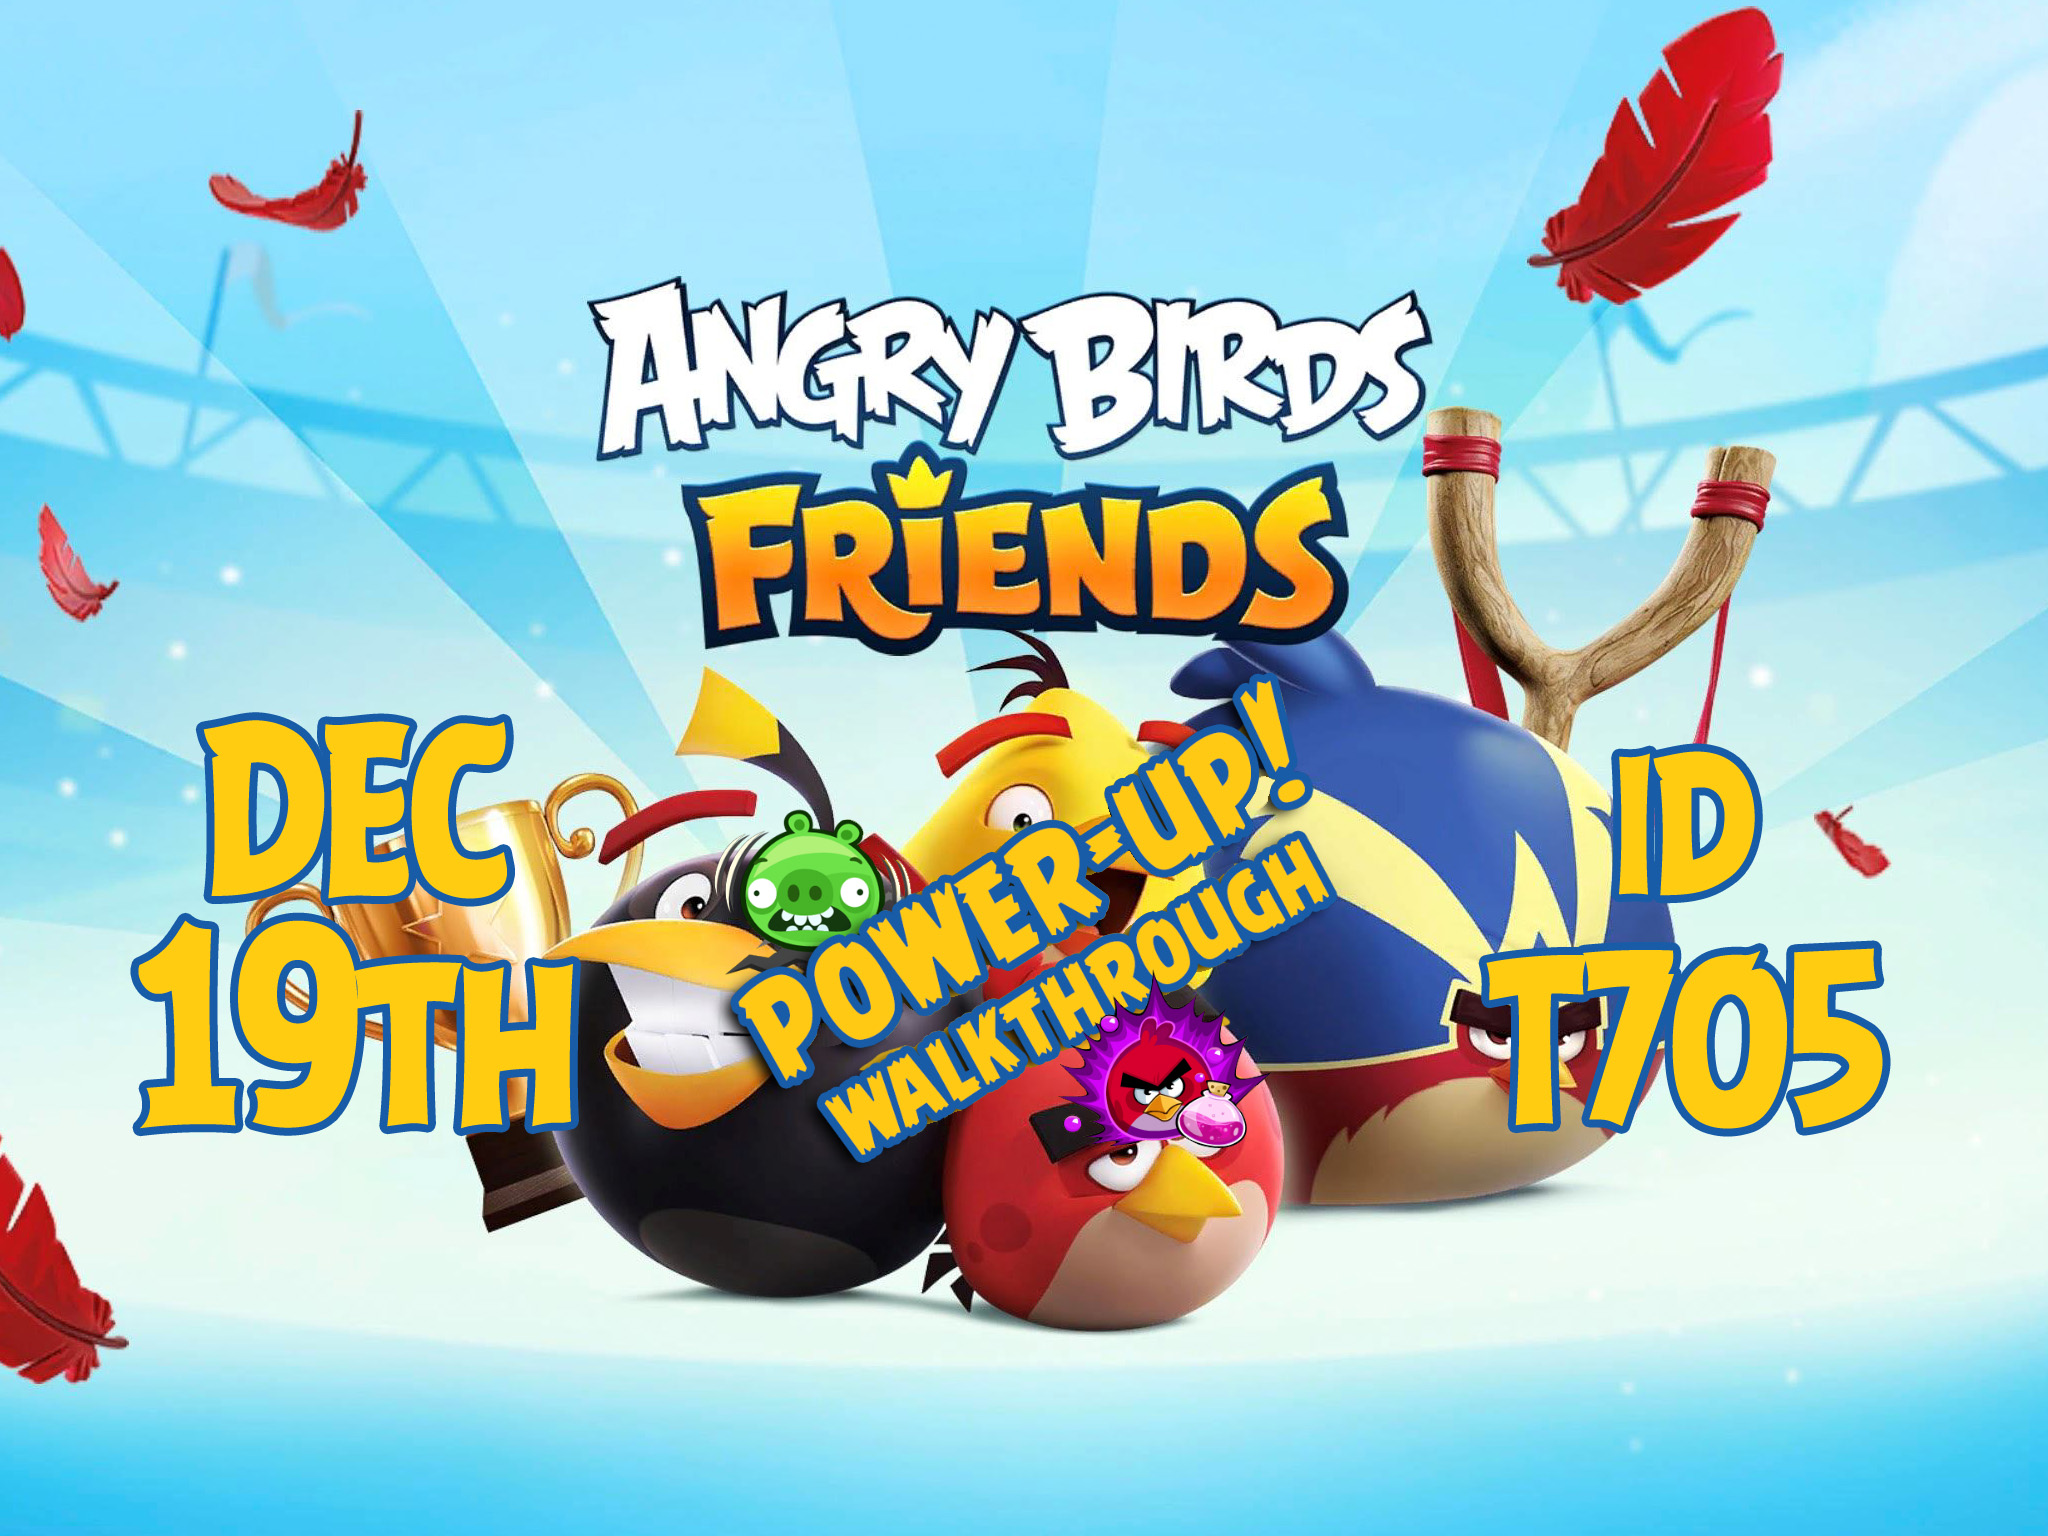 Angry-Birds-Friends-Tournament-T705-Feature-Image-PU